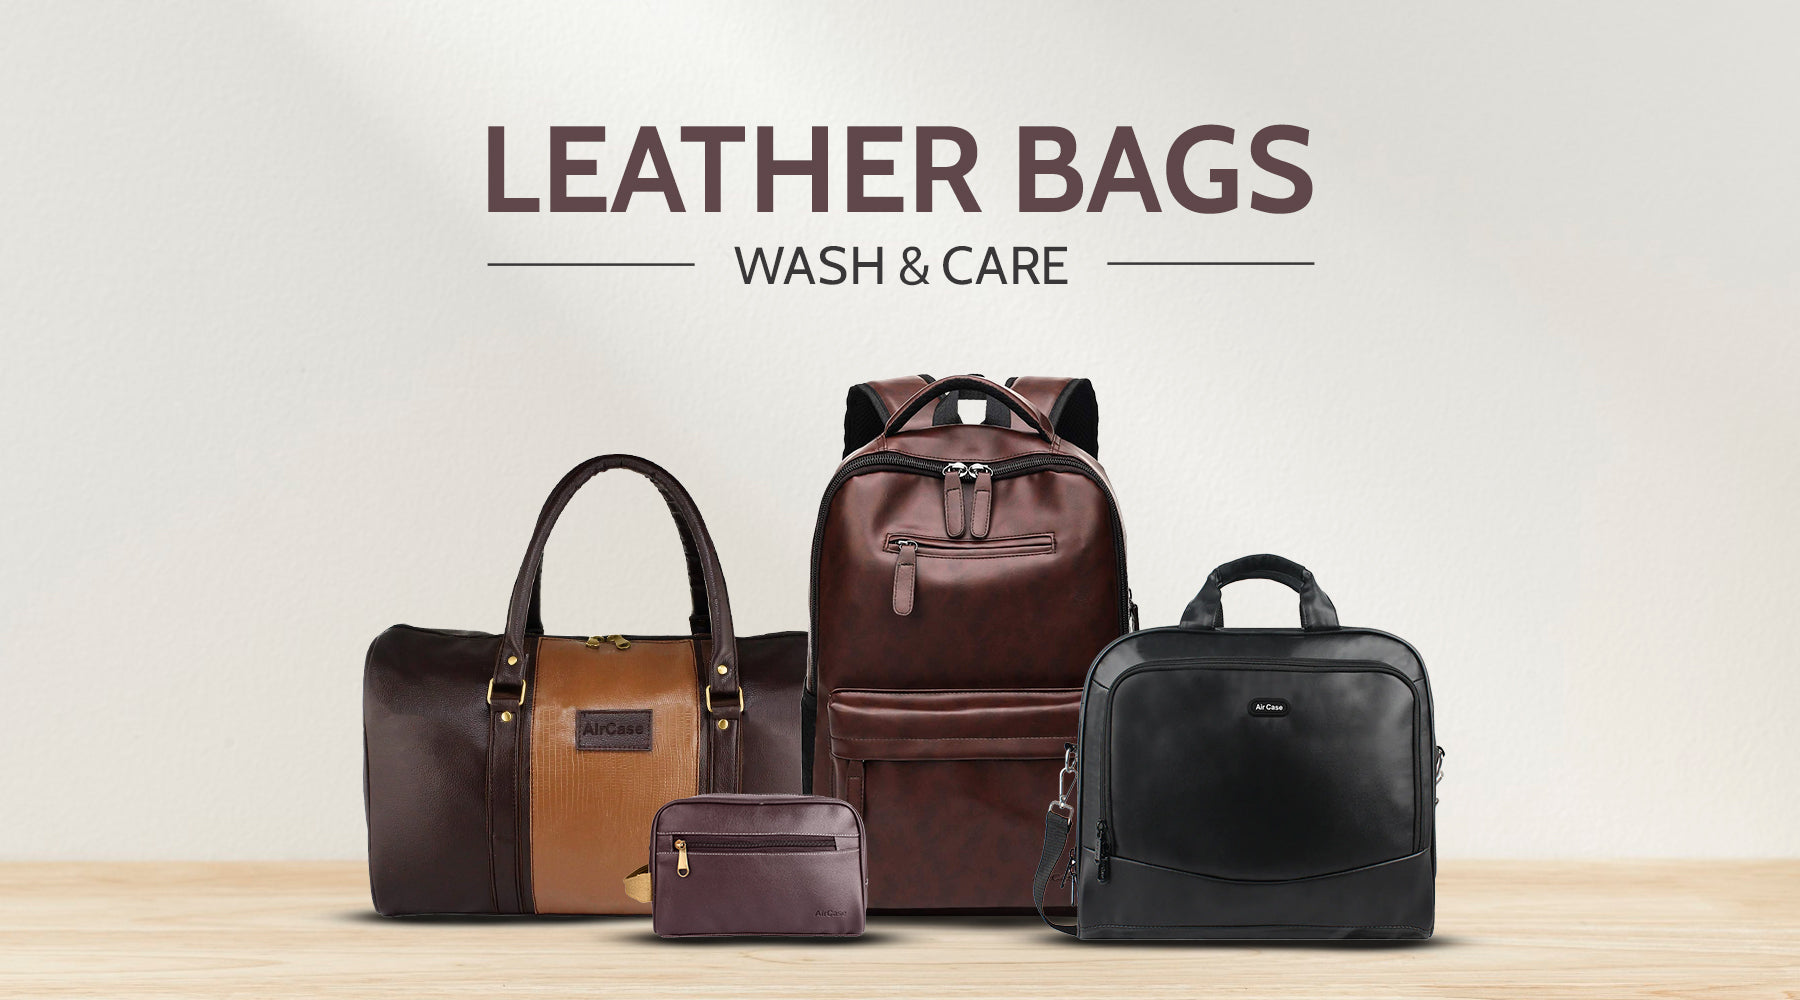 Range of leather bags